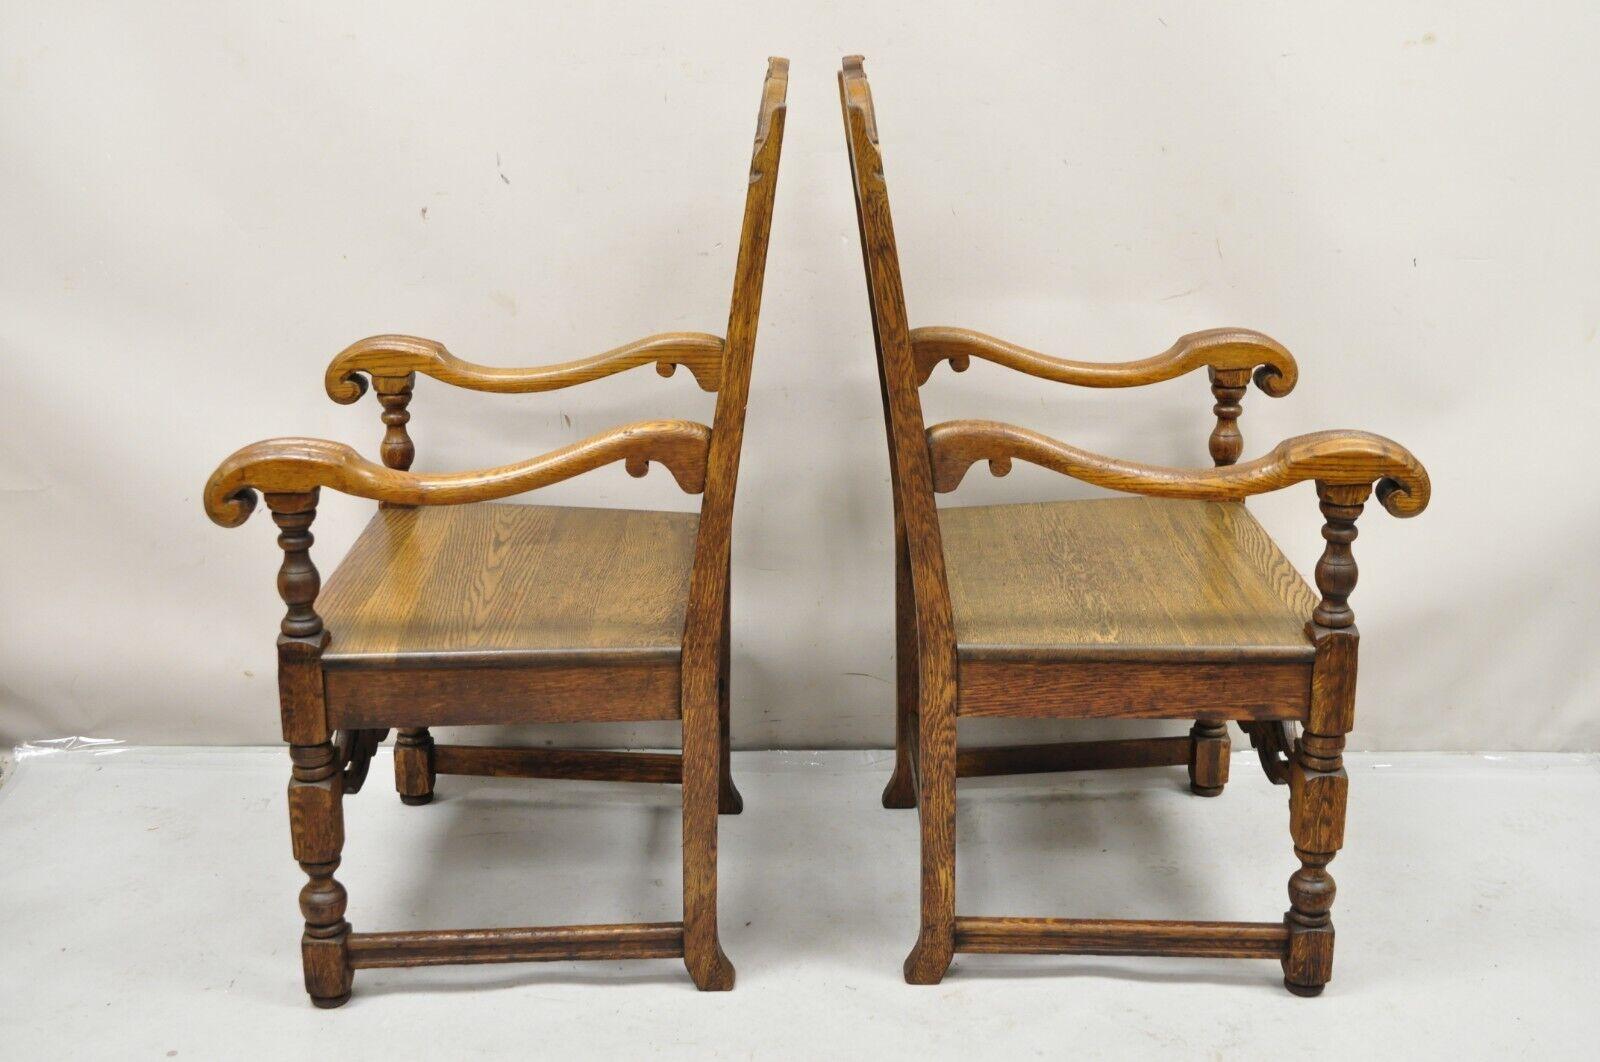 Antique Vanleigh Carved Oak Italian Renaissance Style Throne Arm Chairs - a Pair For Sale 5